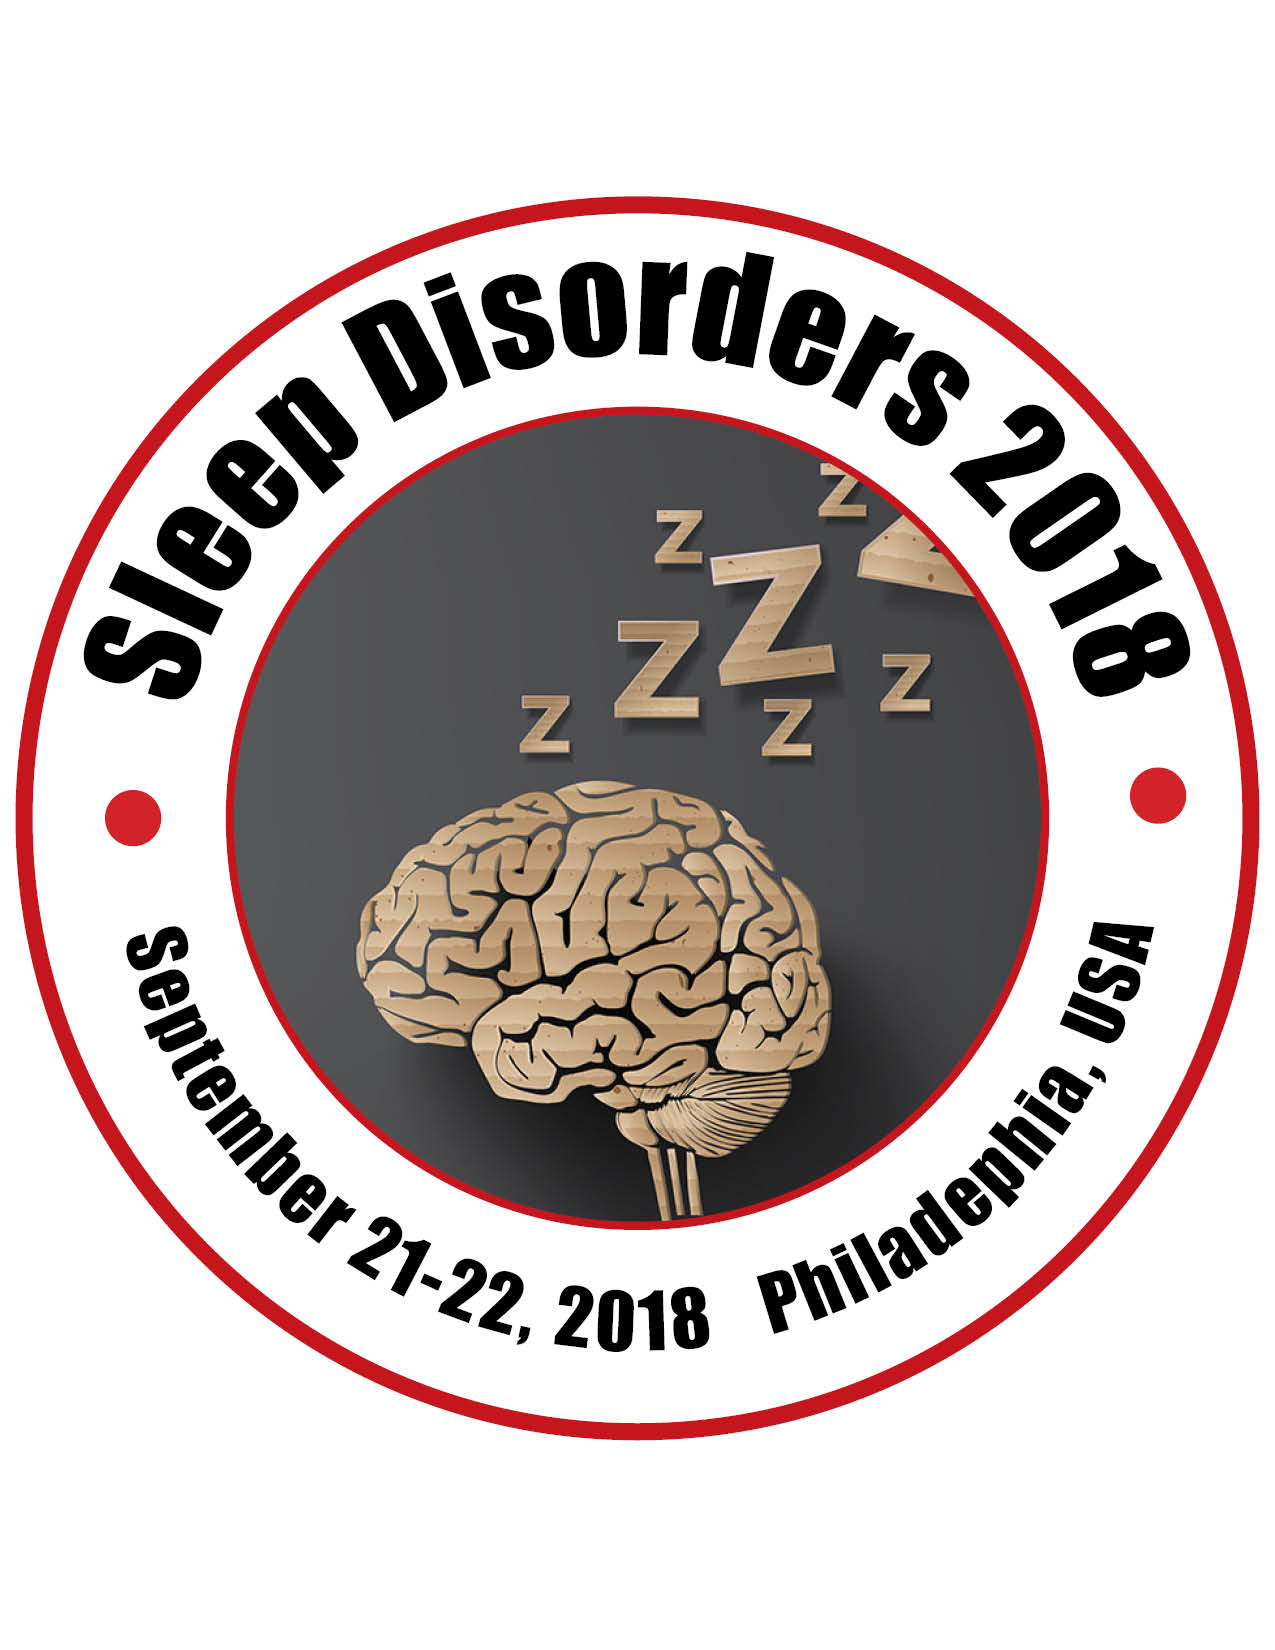 3rd International Conference on Sleep Disorders and Medicine